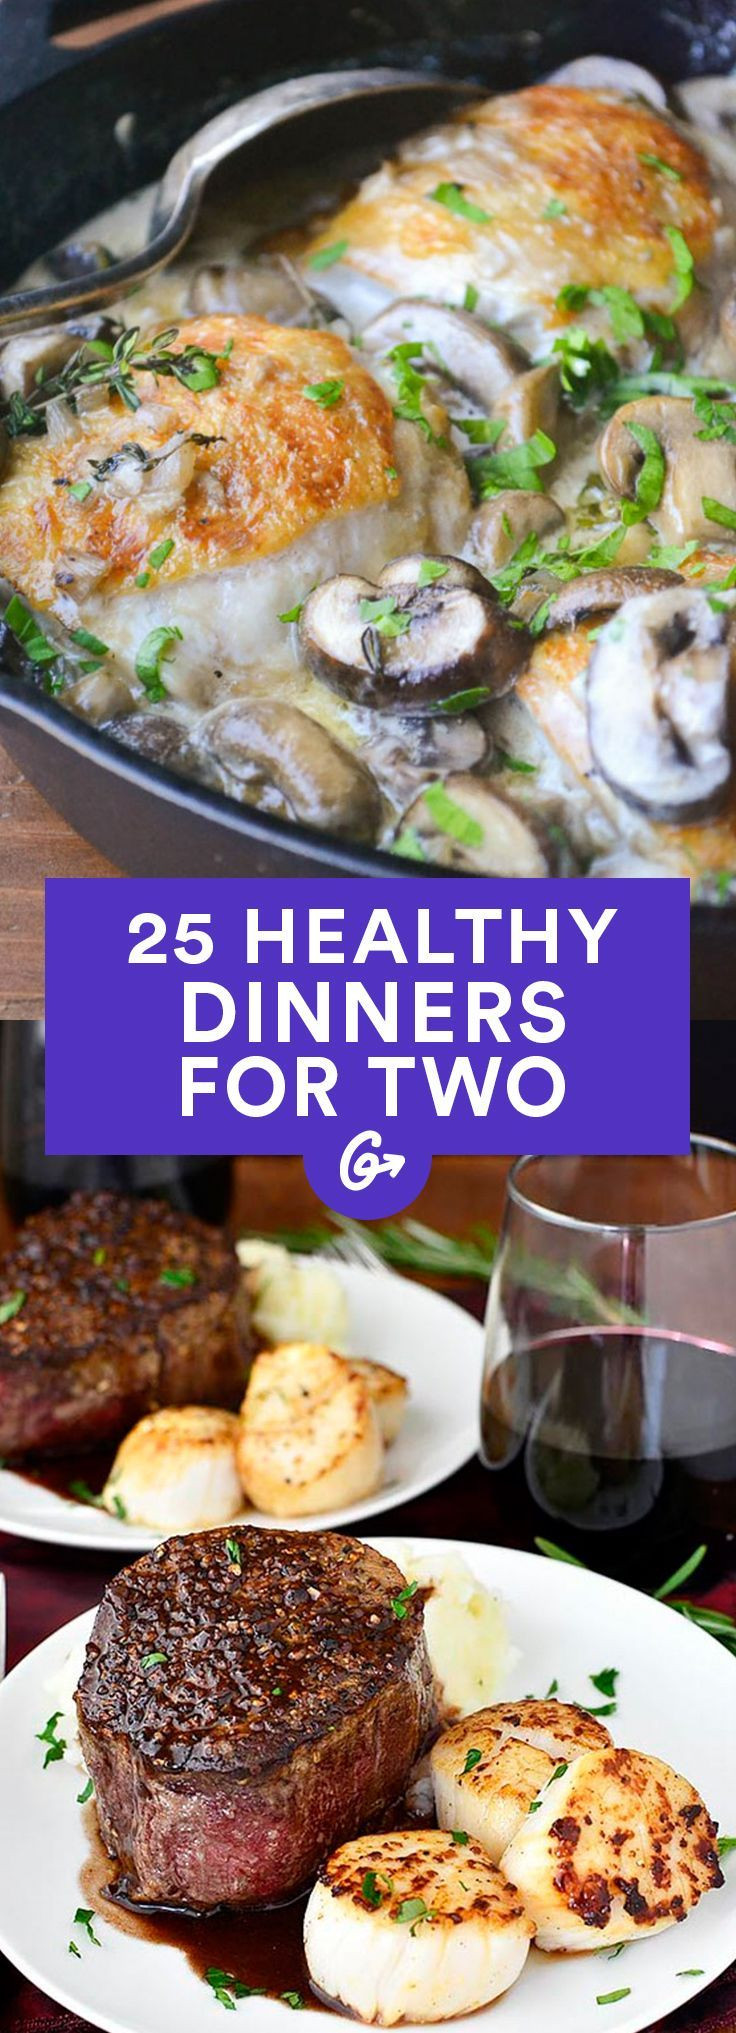 Healthy Dinner For 2
 25 Healthy Dinner Recipes for Two